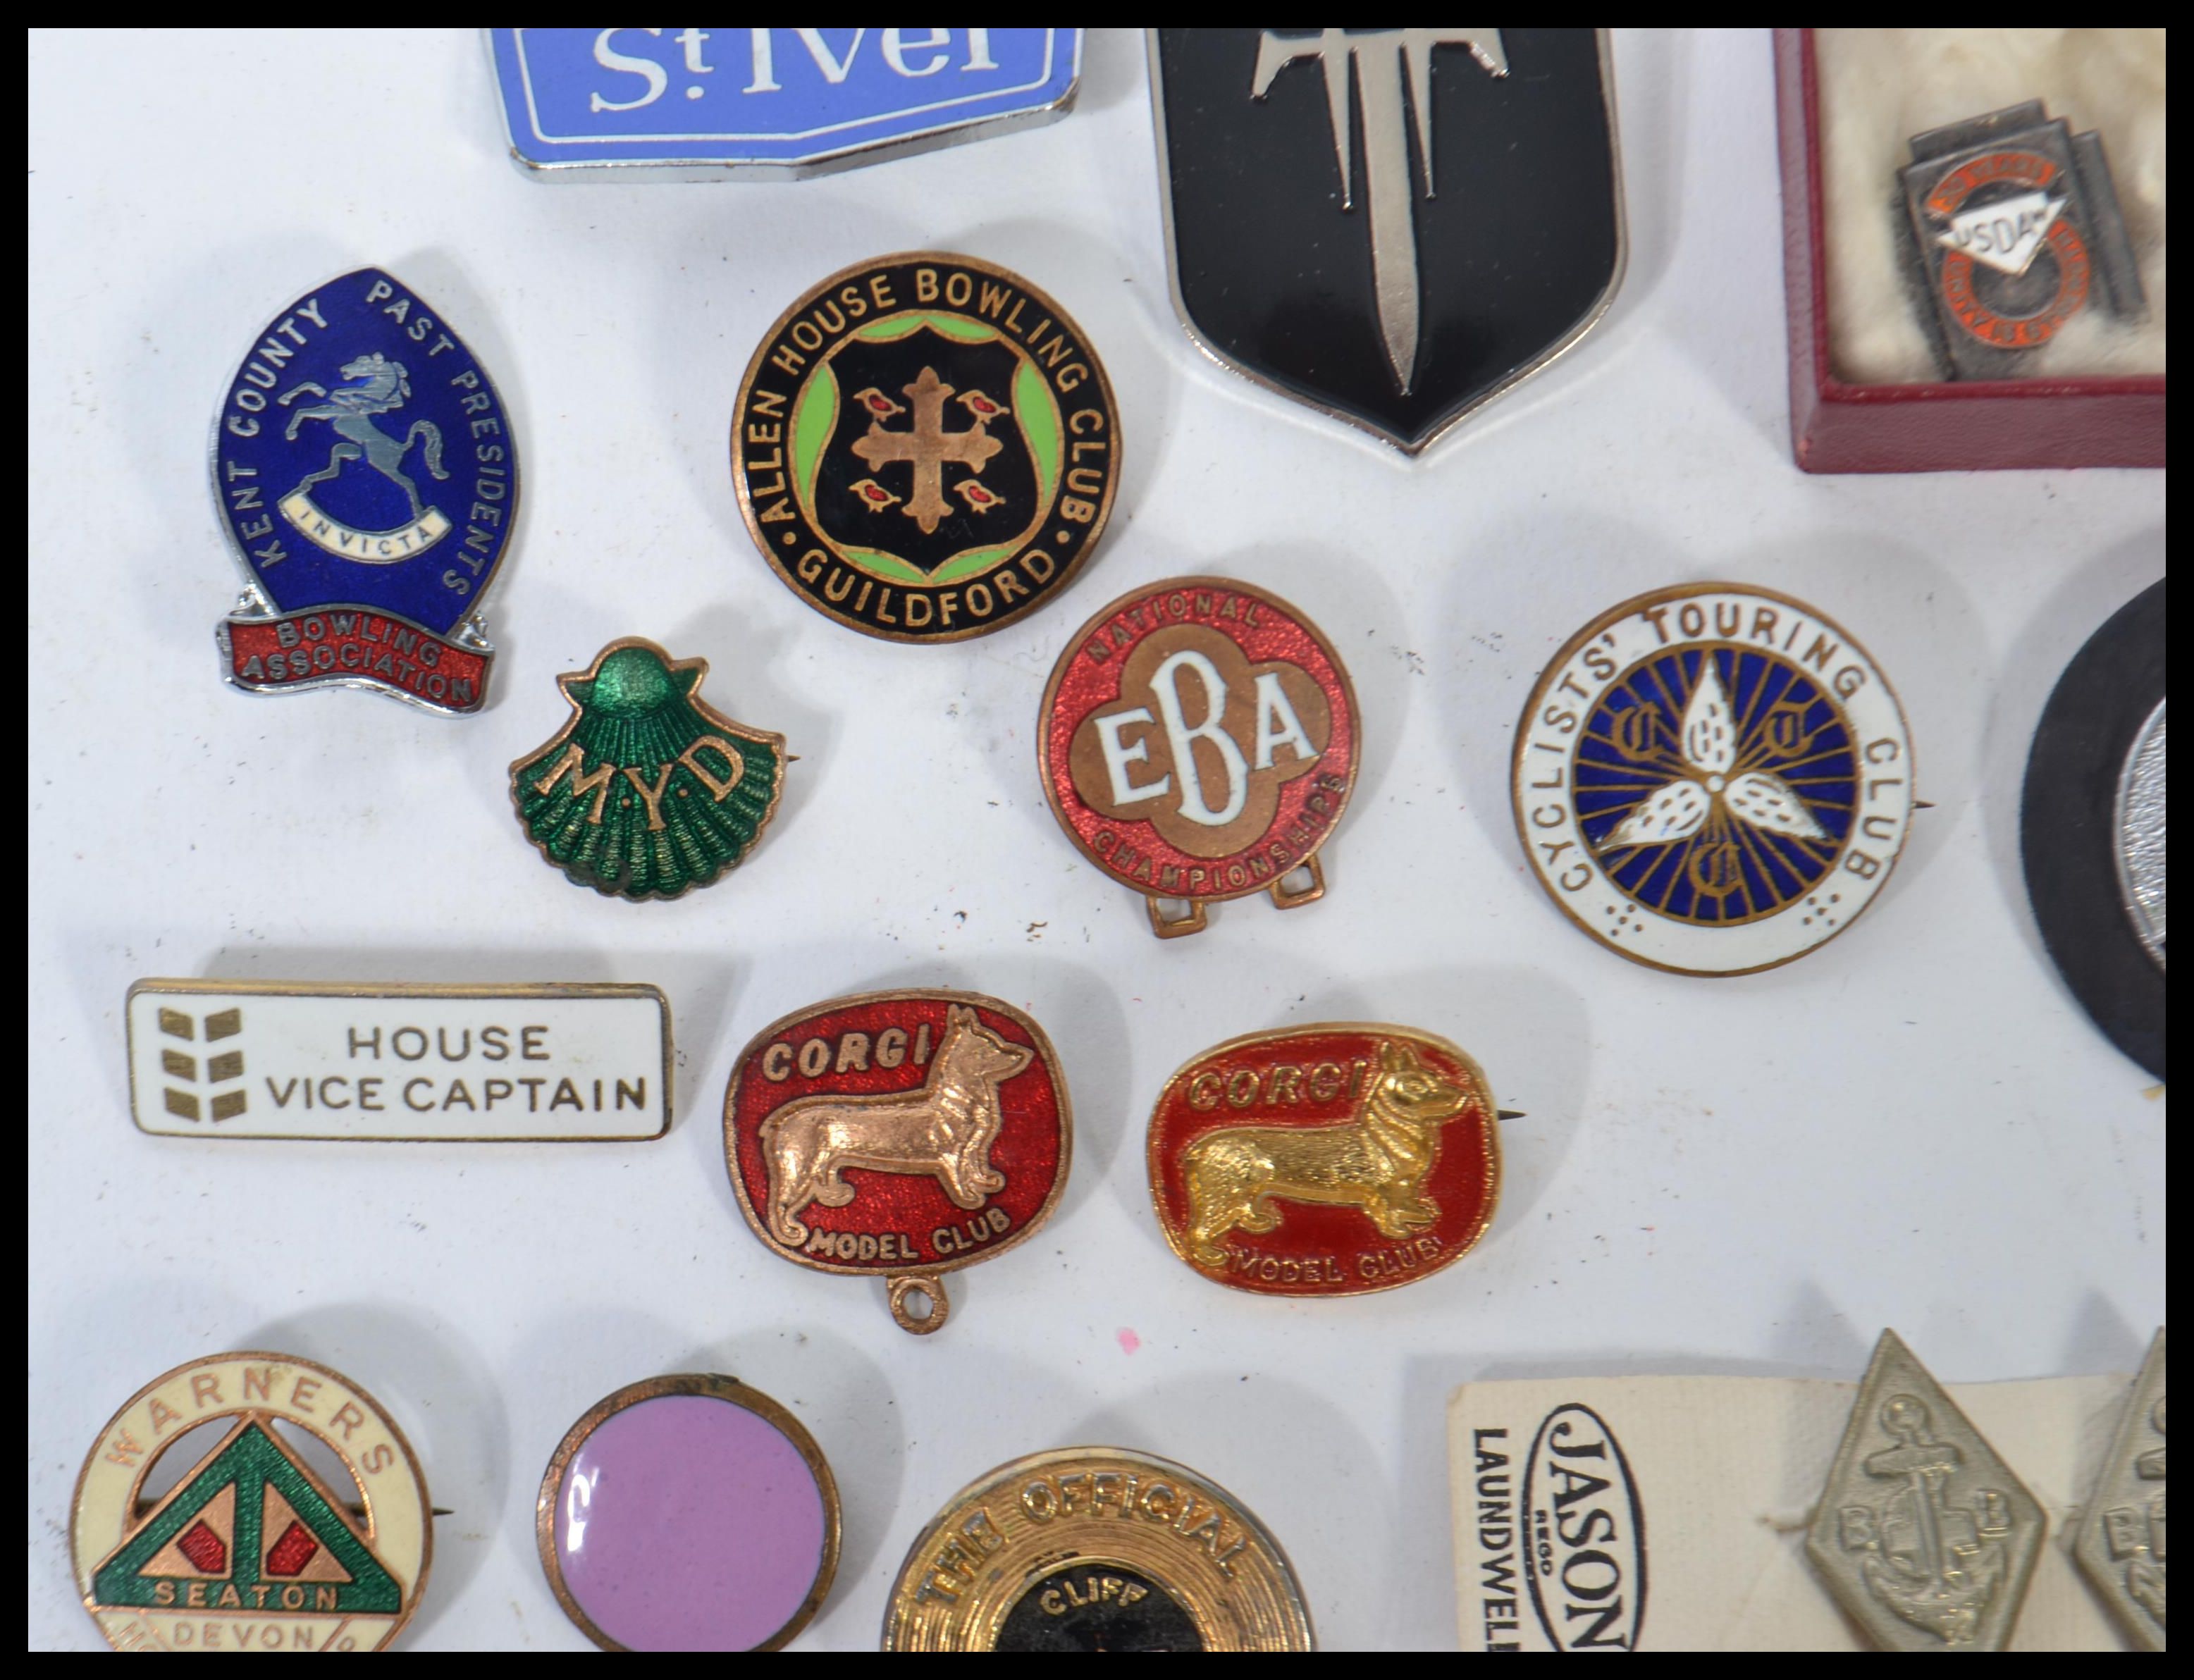 A good collection of vintage Enamel pin badges dating from the first half of the 20th century to - Image 5 of 10